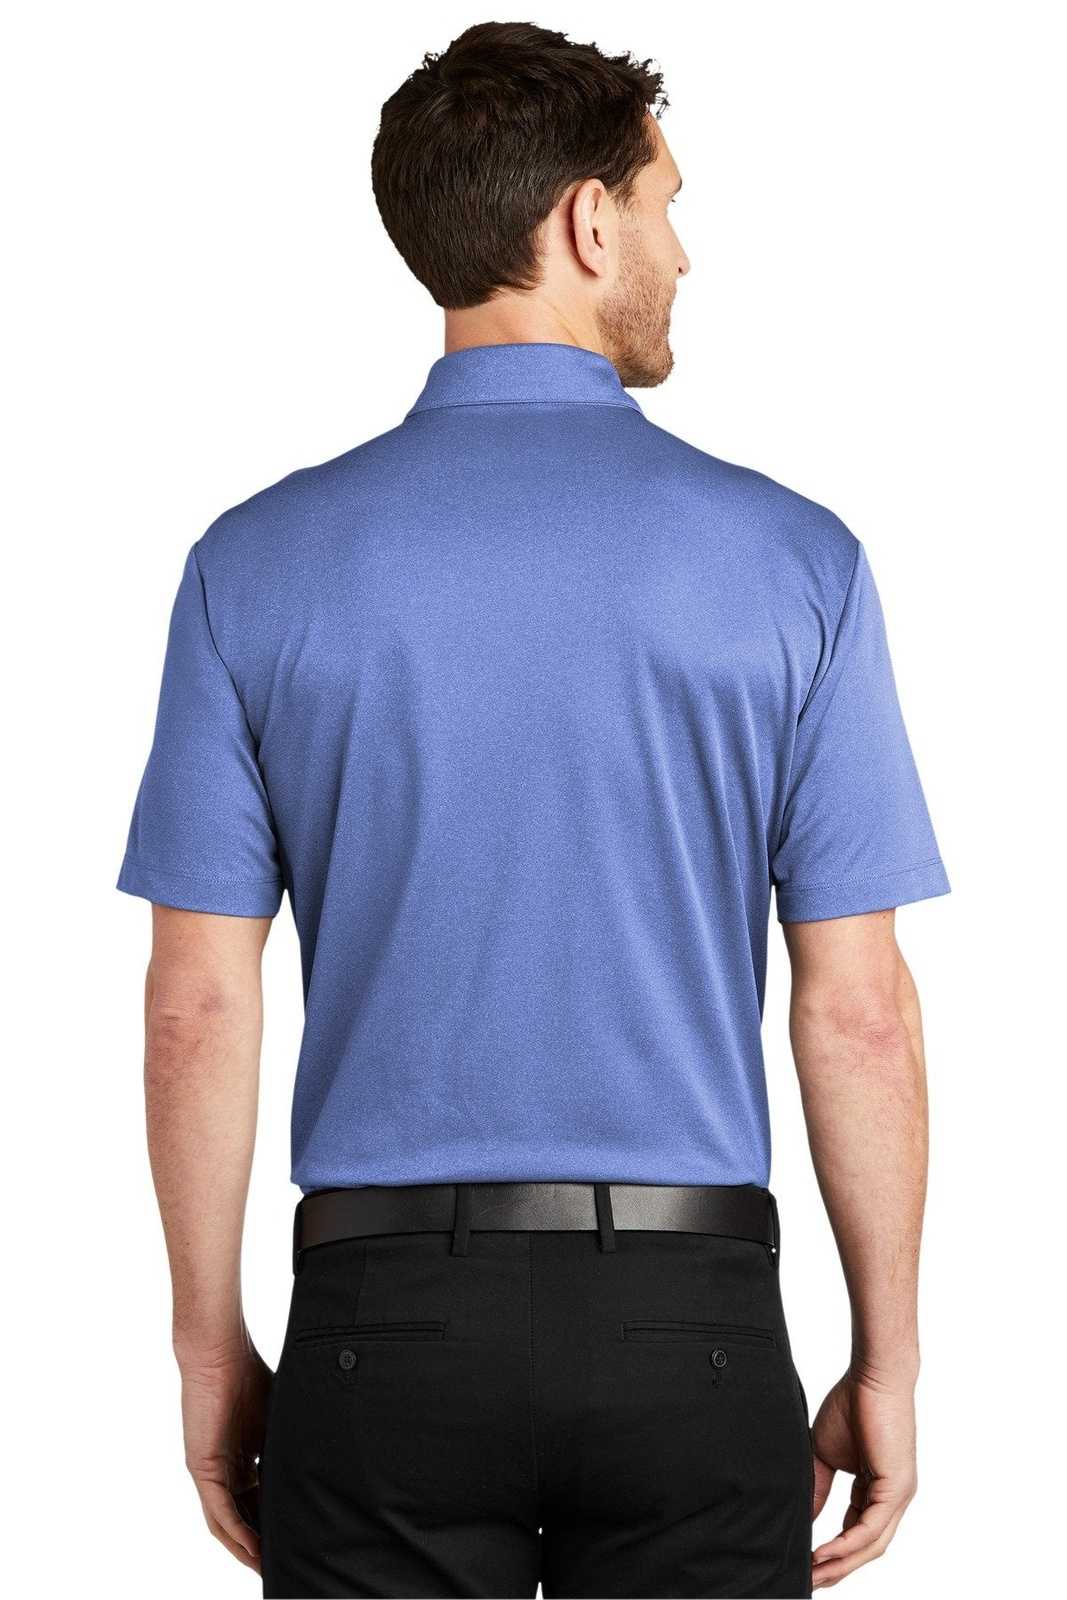 Port Authority K542 Heathered Silk Touch Performance Polo - Moonlight Blue Heather - HIT a Double - 1